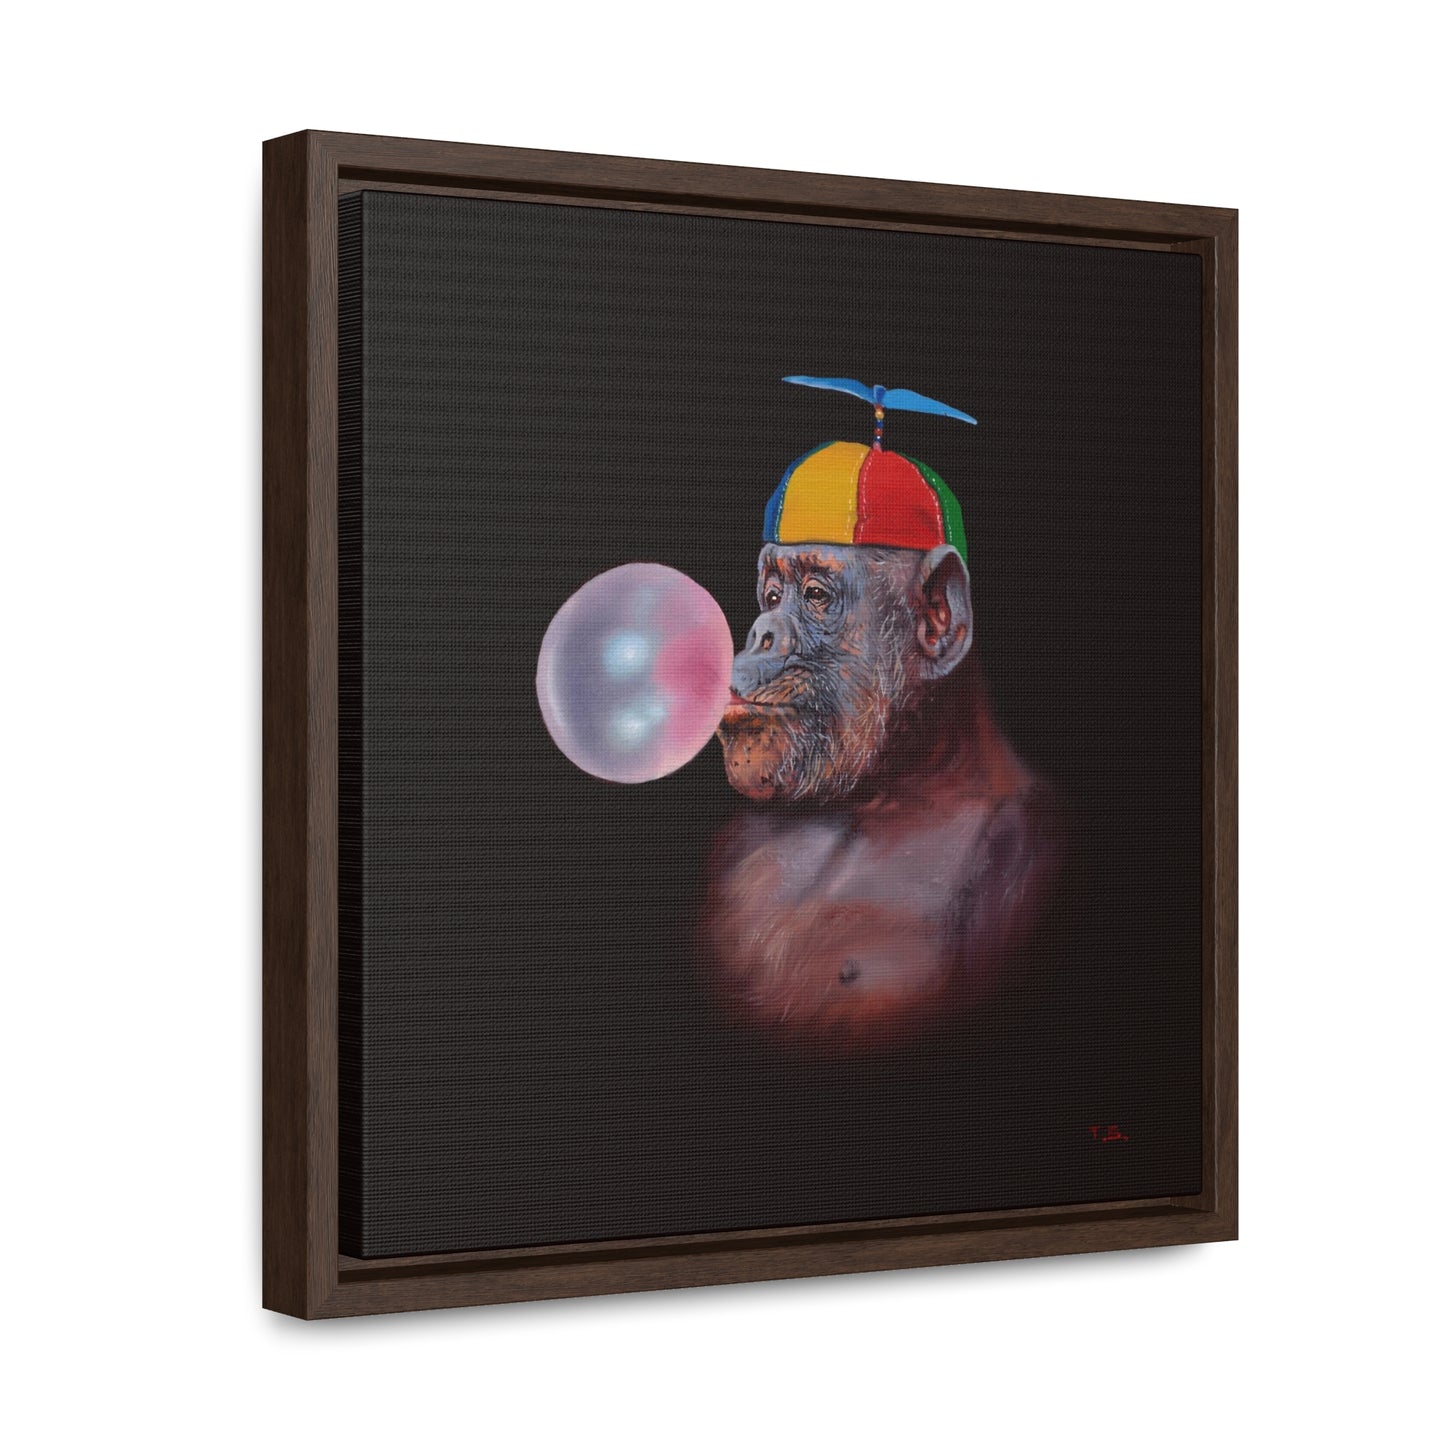 Tony South: "Inflate" - Framed Canvas Reproduction